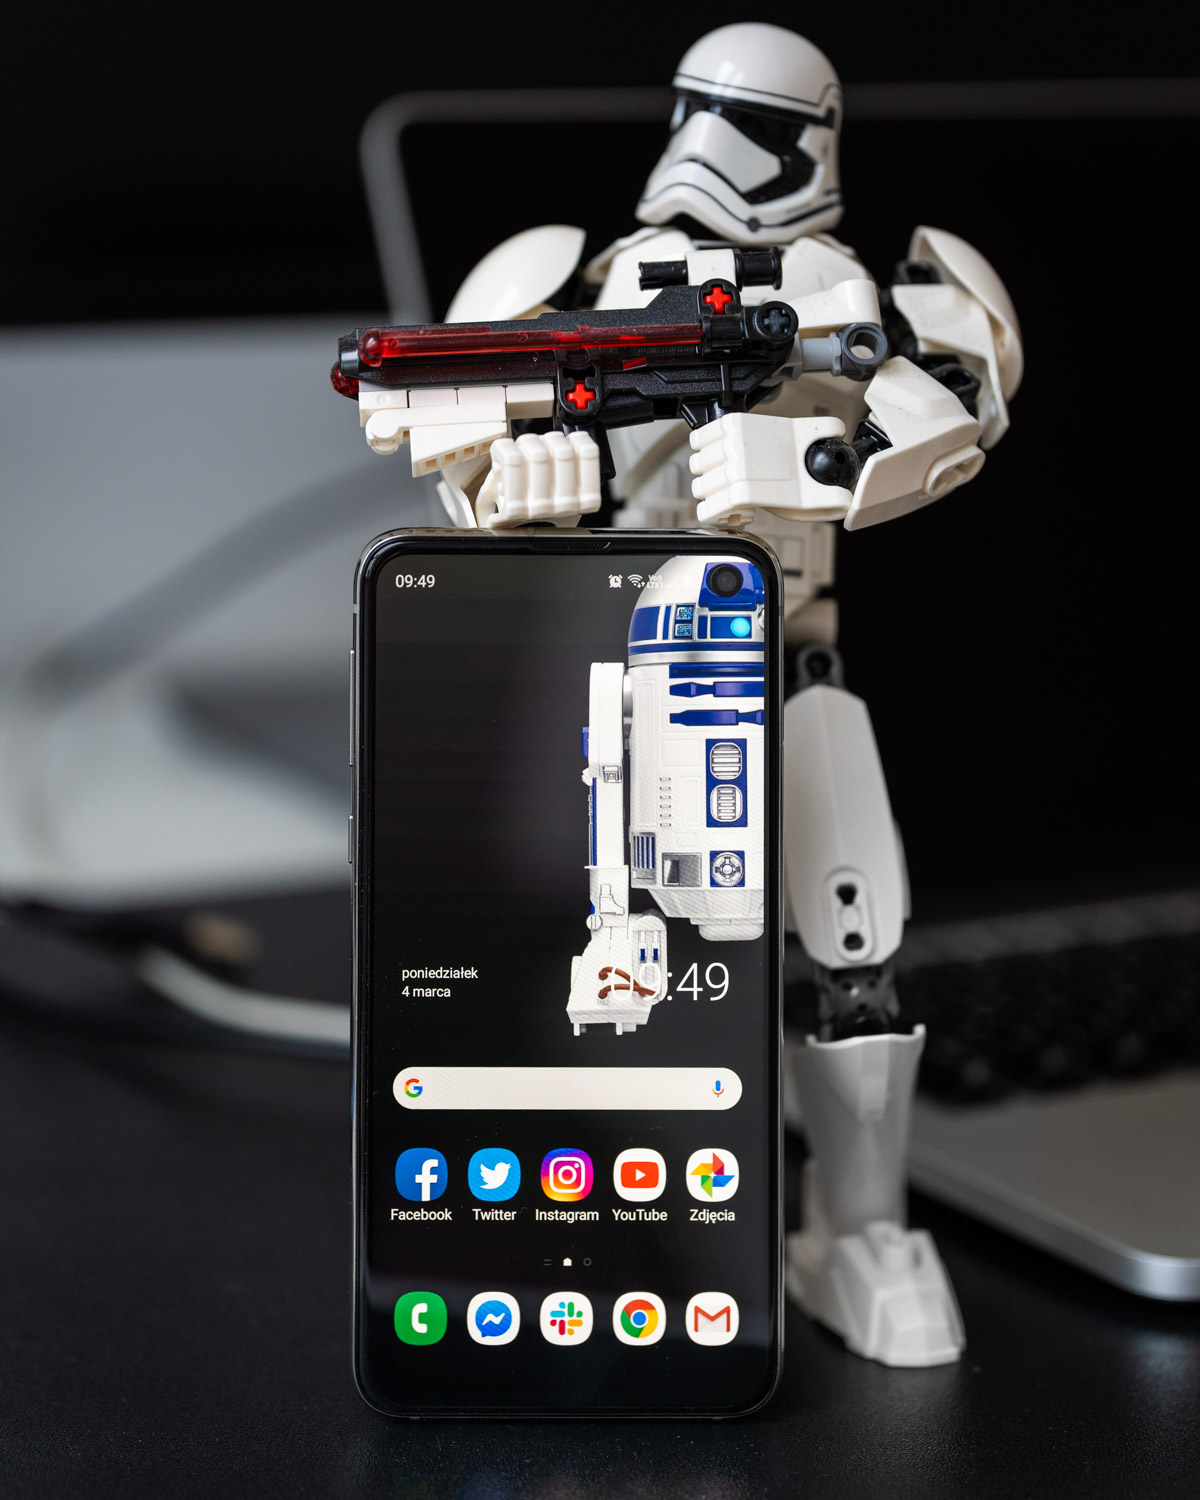 Have You Already Seen The Master Wallpaper On Samsung Galaxy S10